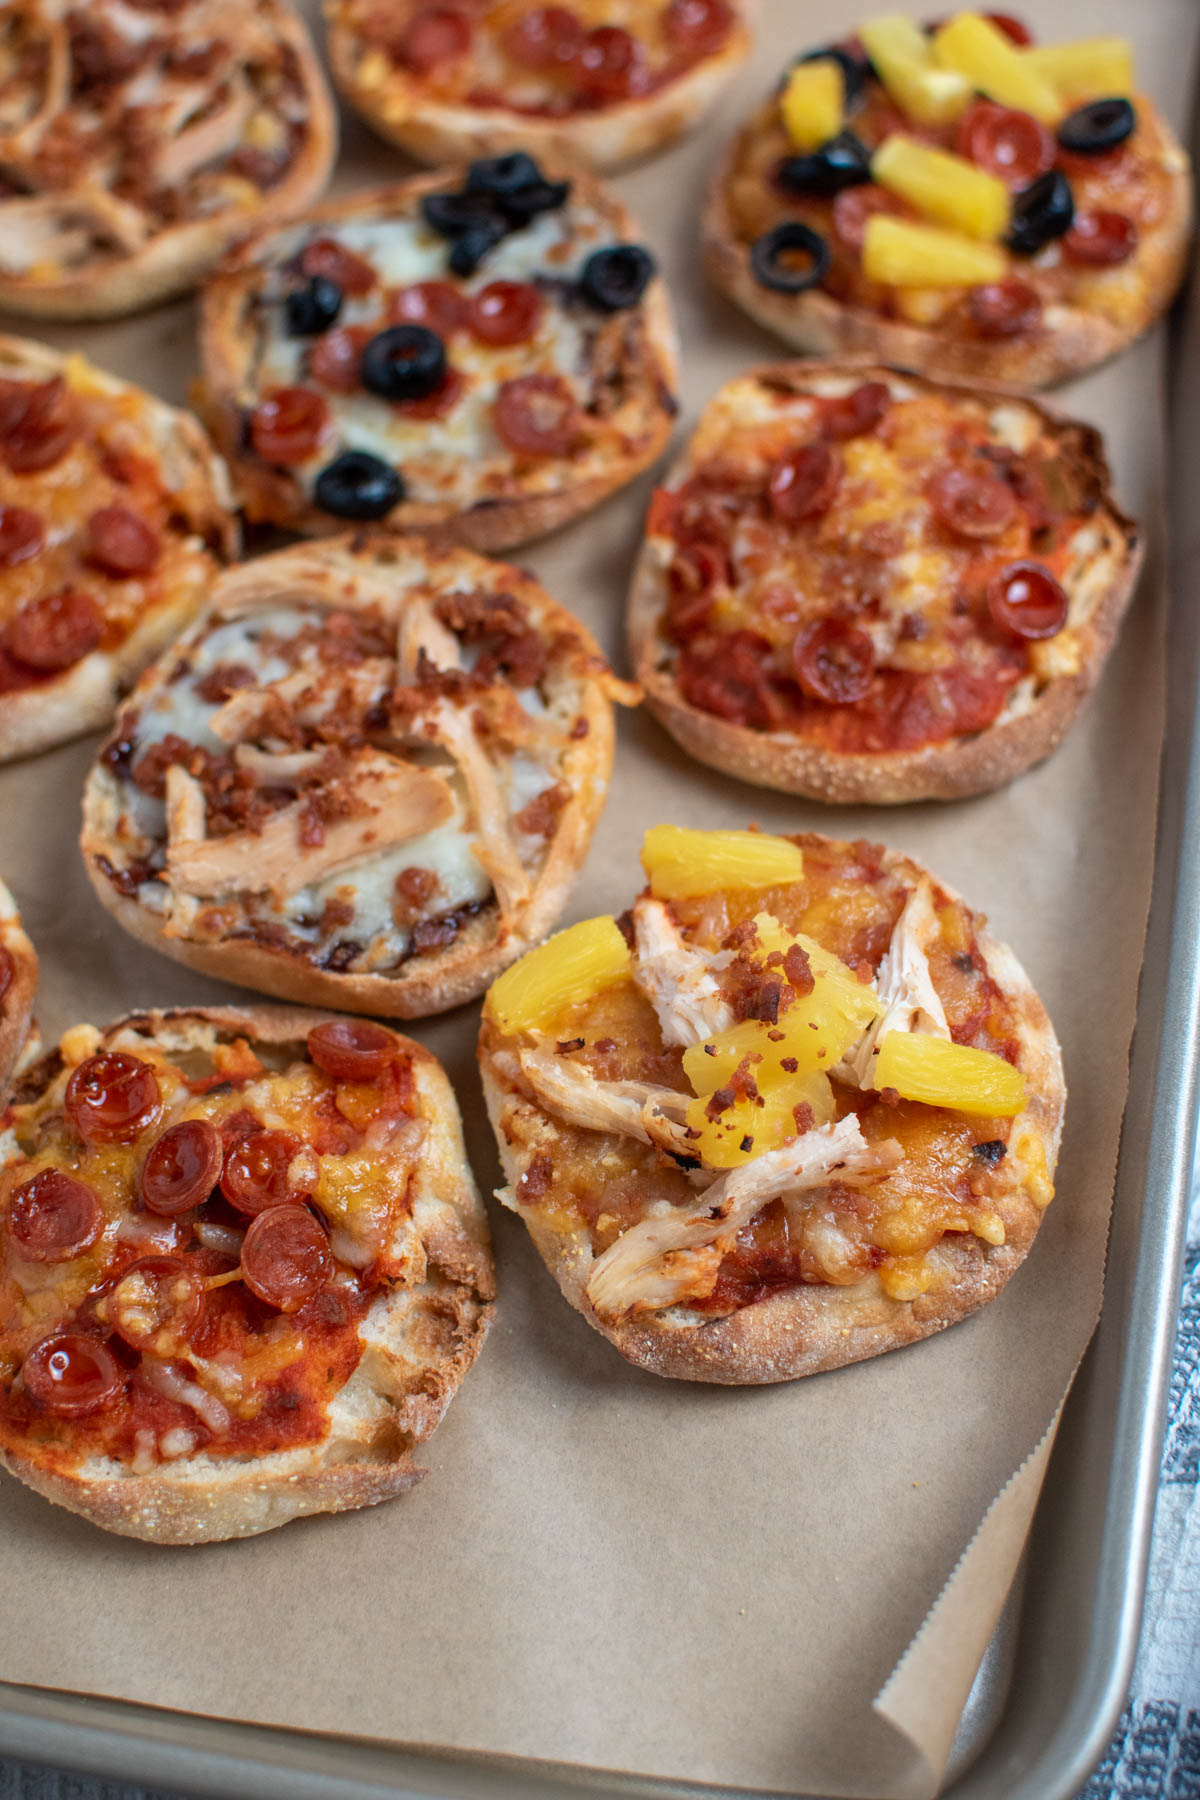 English muffin pizzas with pepperoni, pineapple, and chicken on baking sheet.